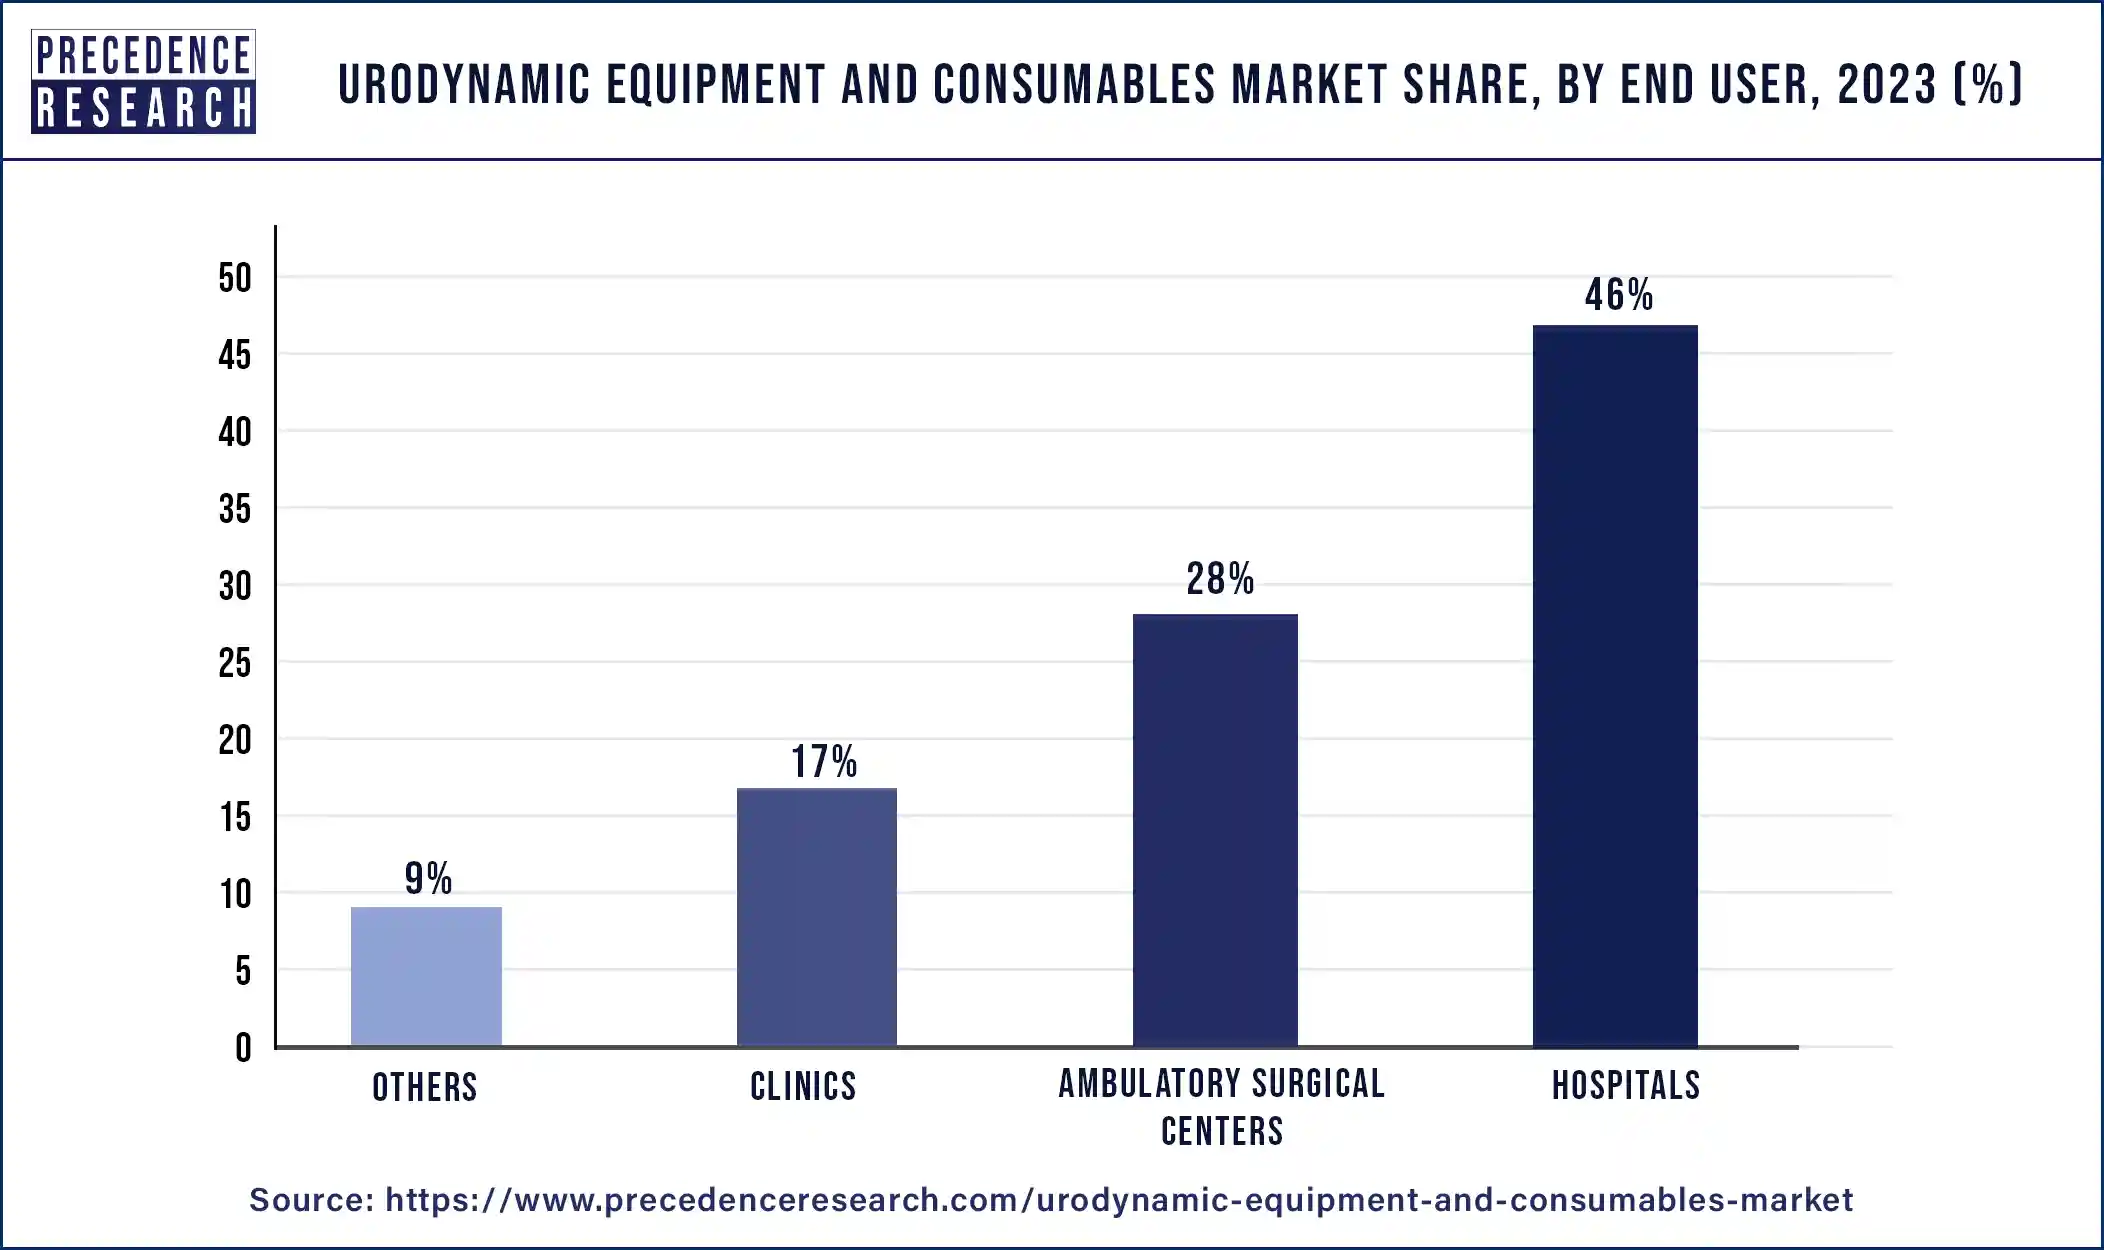 Urodynamic Equipment and Consumables Market Share, By End User, 2023 (%)